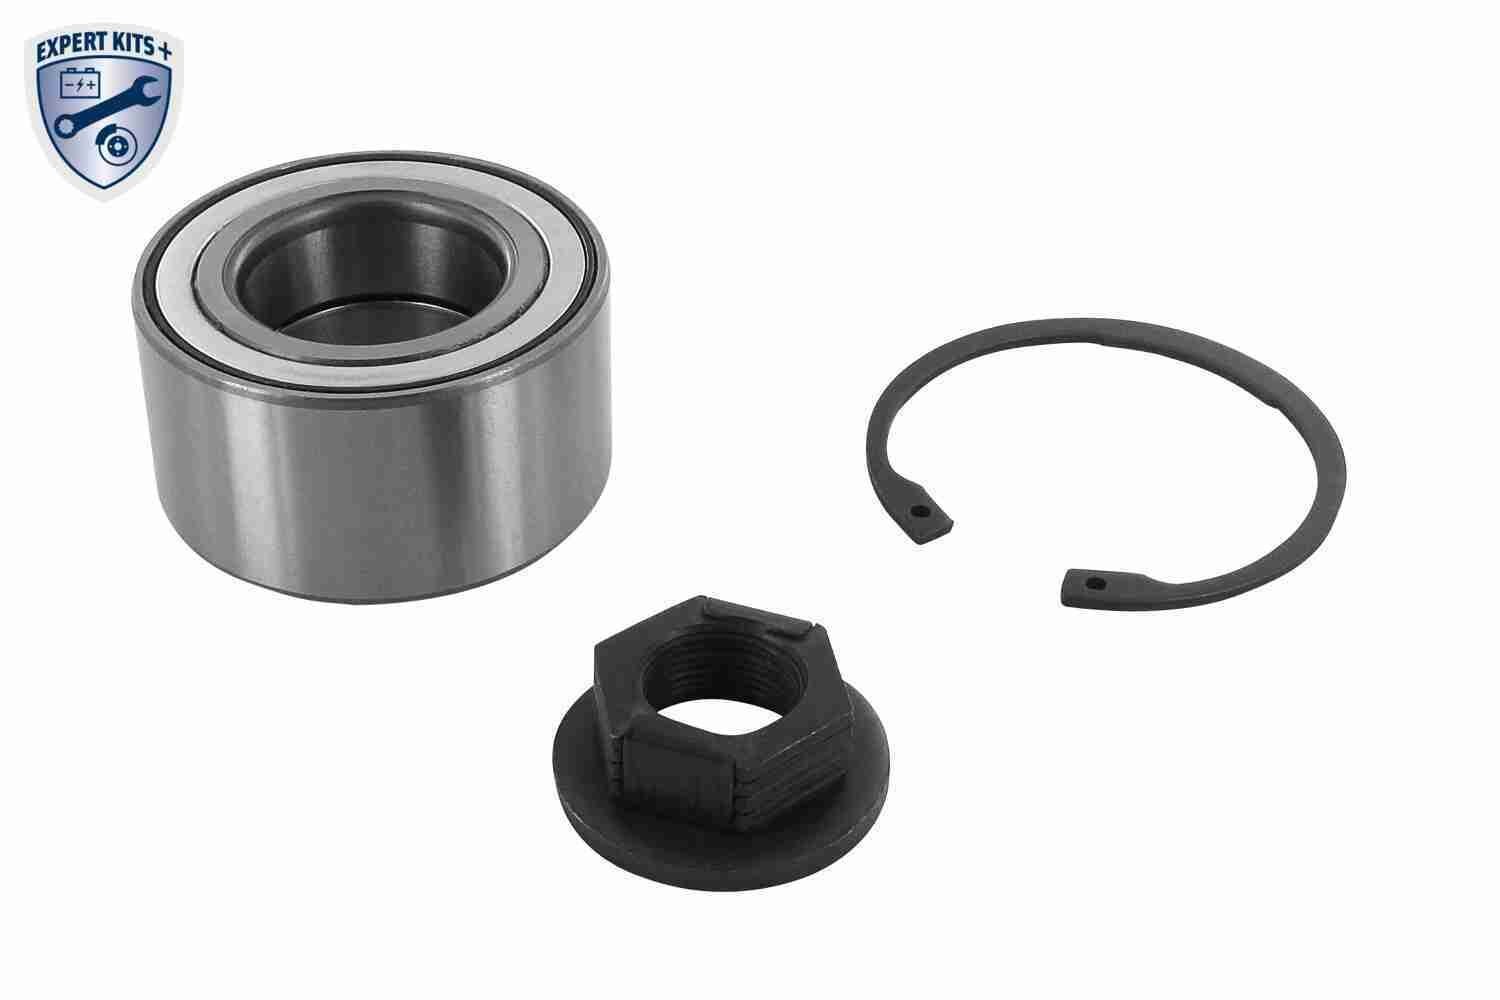 VAICO V25-0459 Wheel bearing kit Front Axle, EXPERT KITS +, with integrated magnetic sensor ring, 72 mm